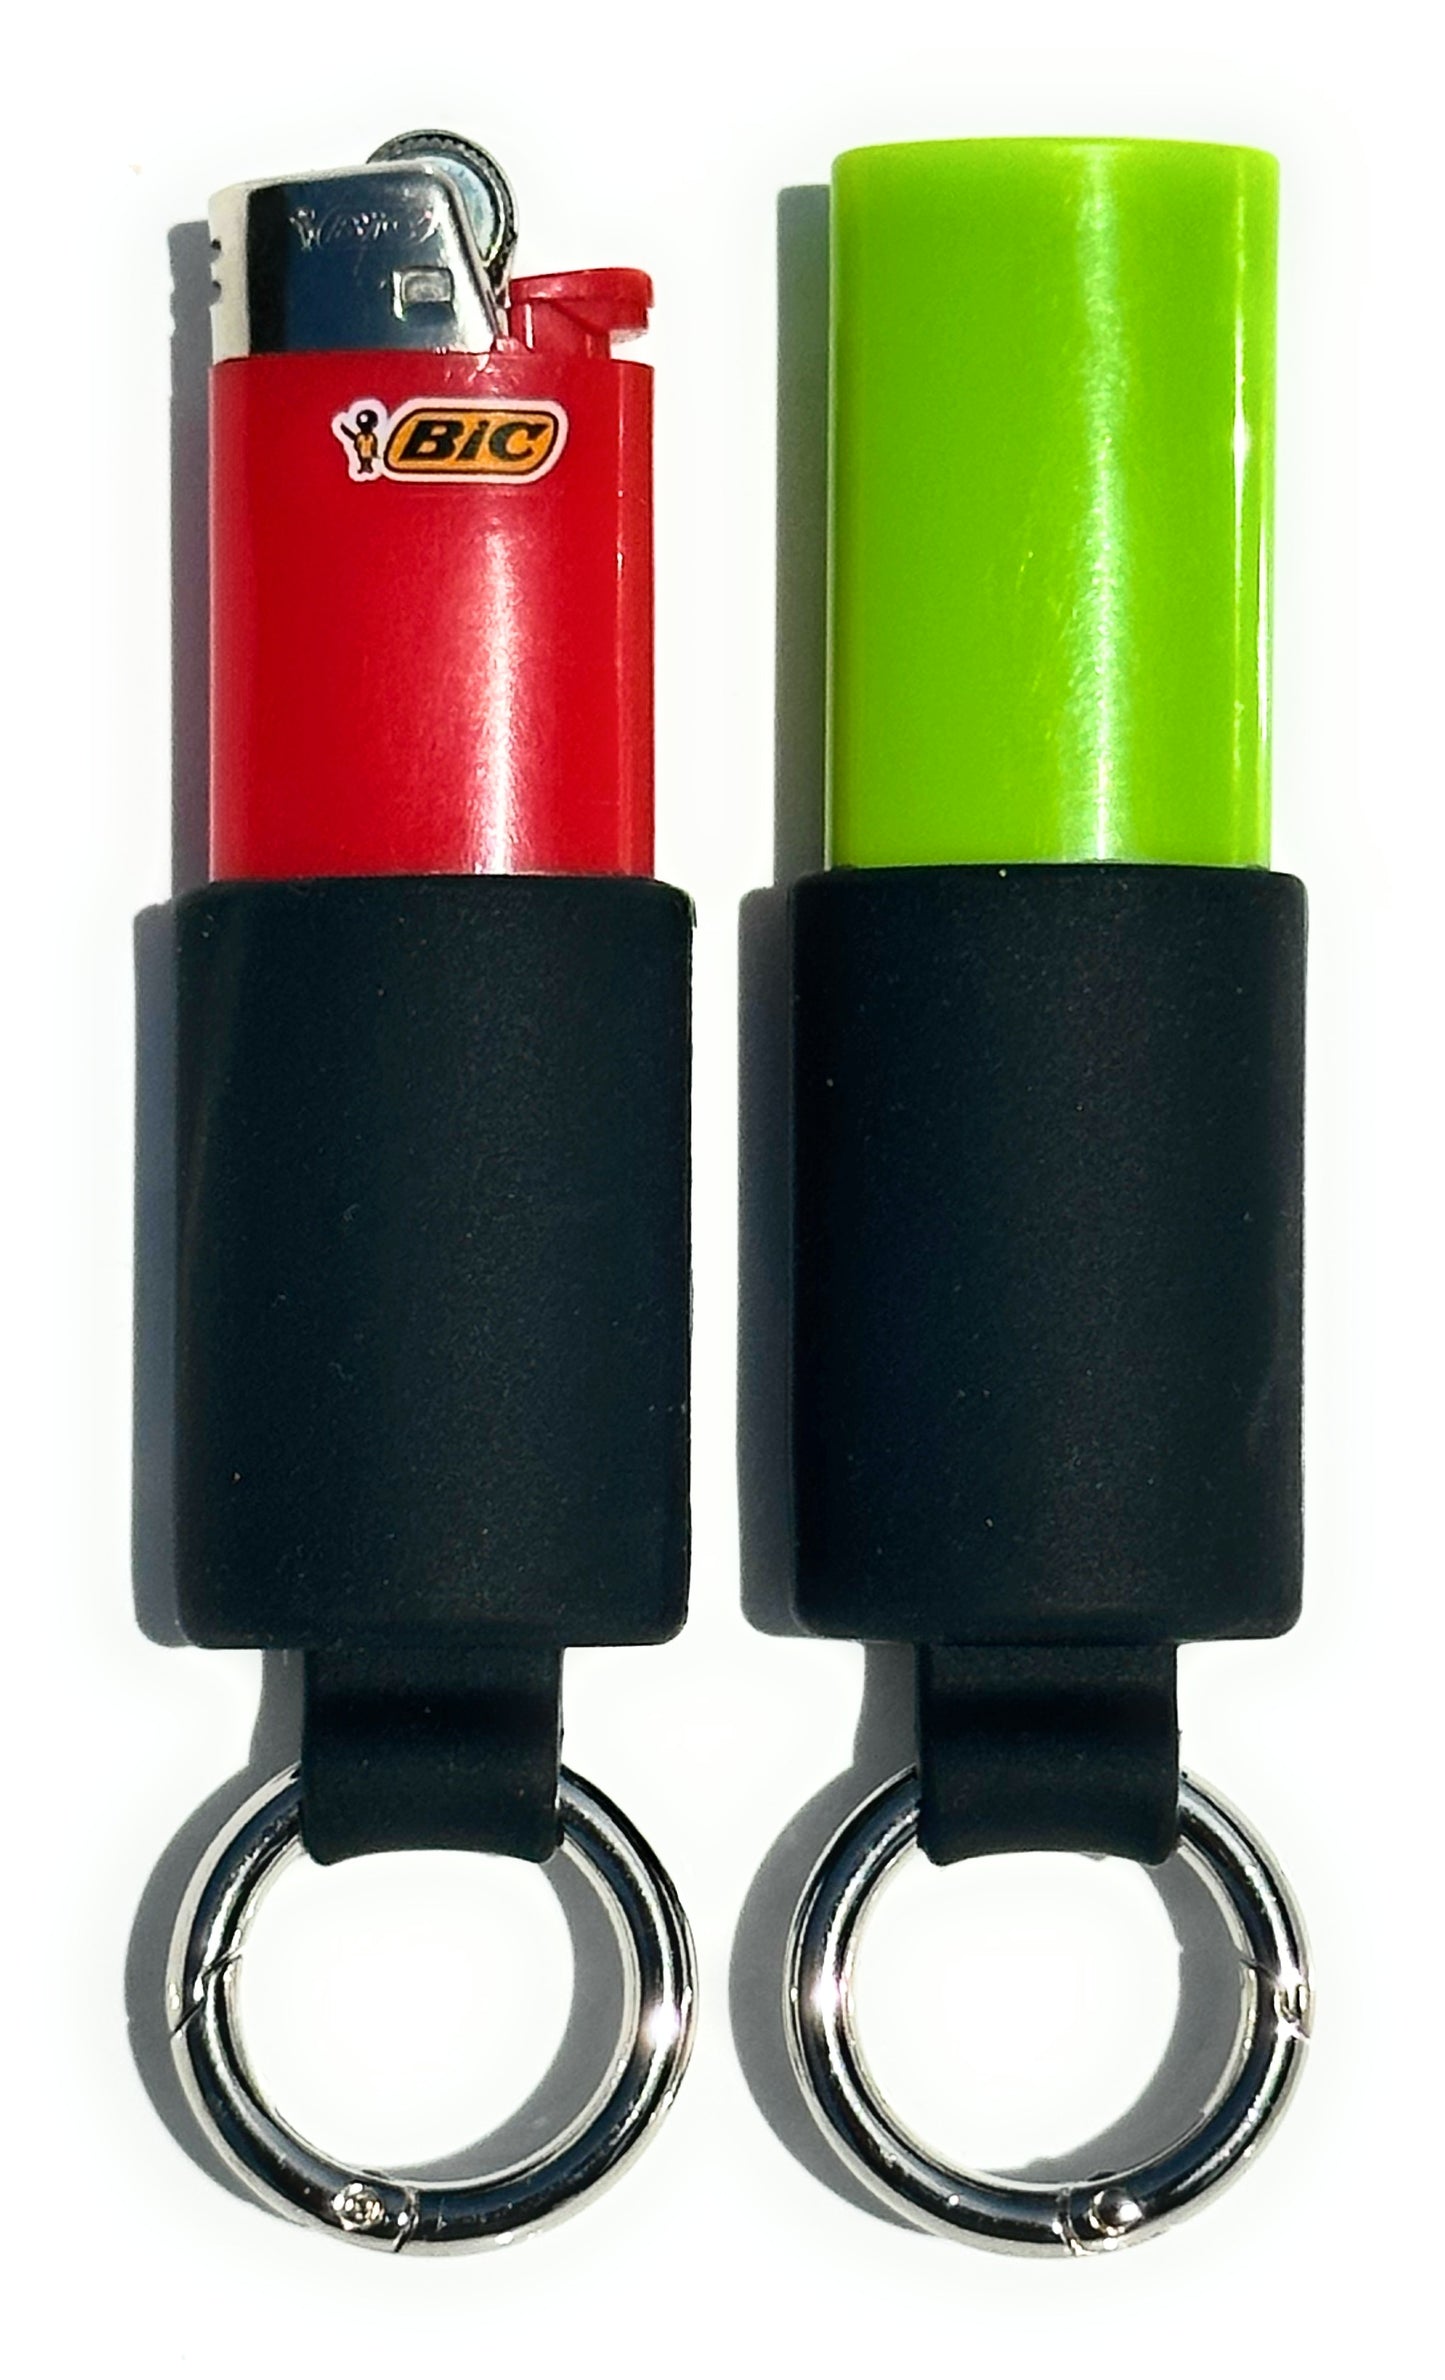 Keychain Lighter Safety Caps with Spring Clips (2 Pack)